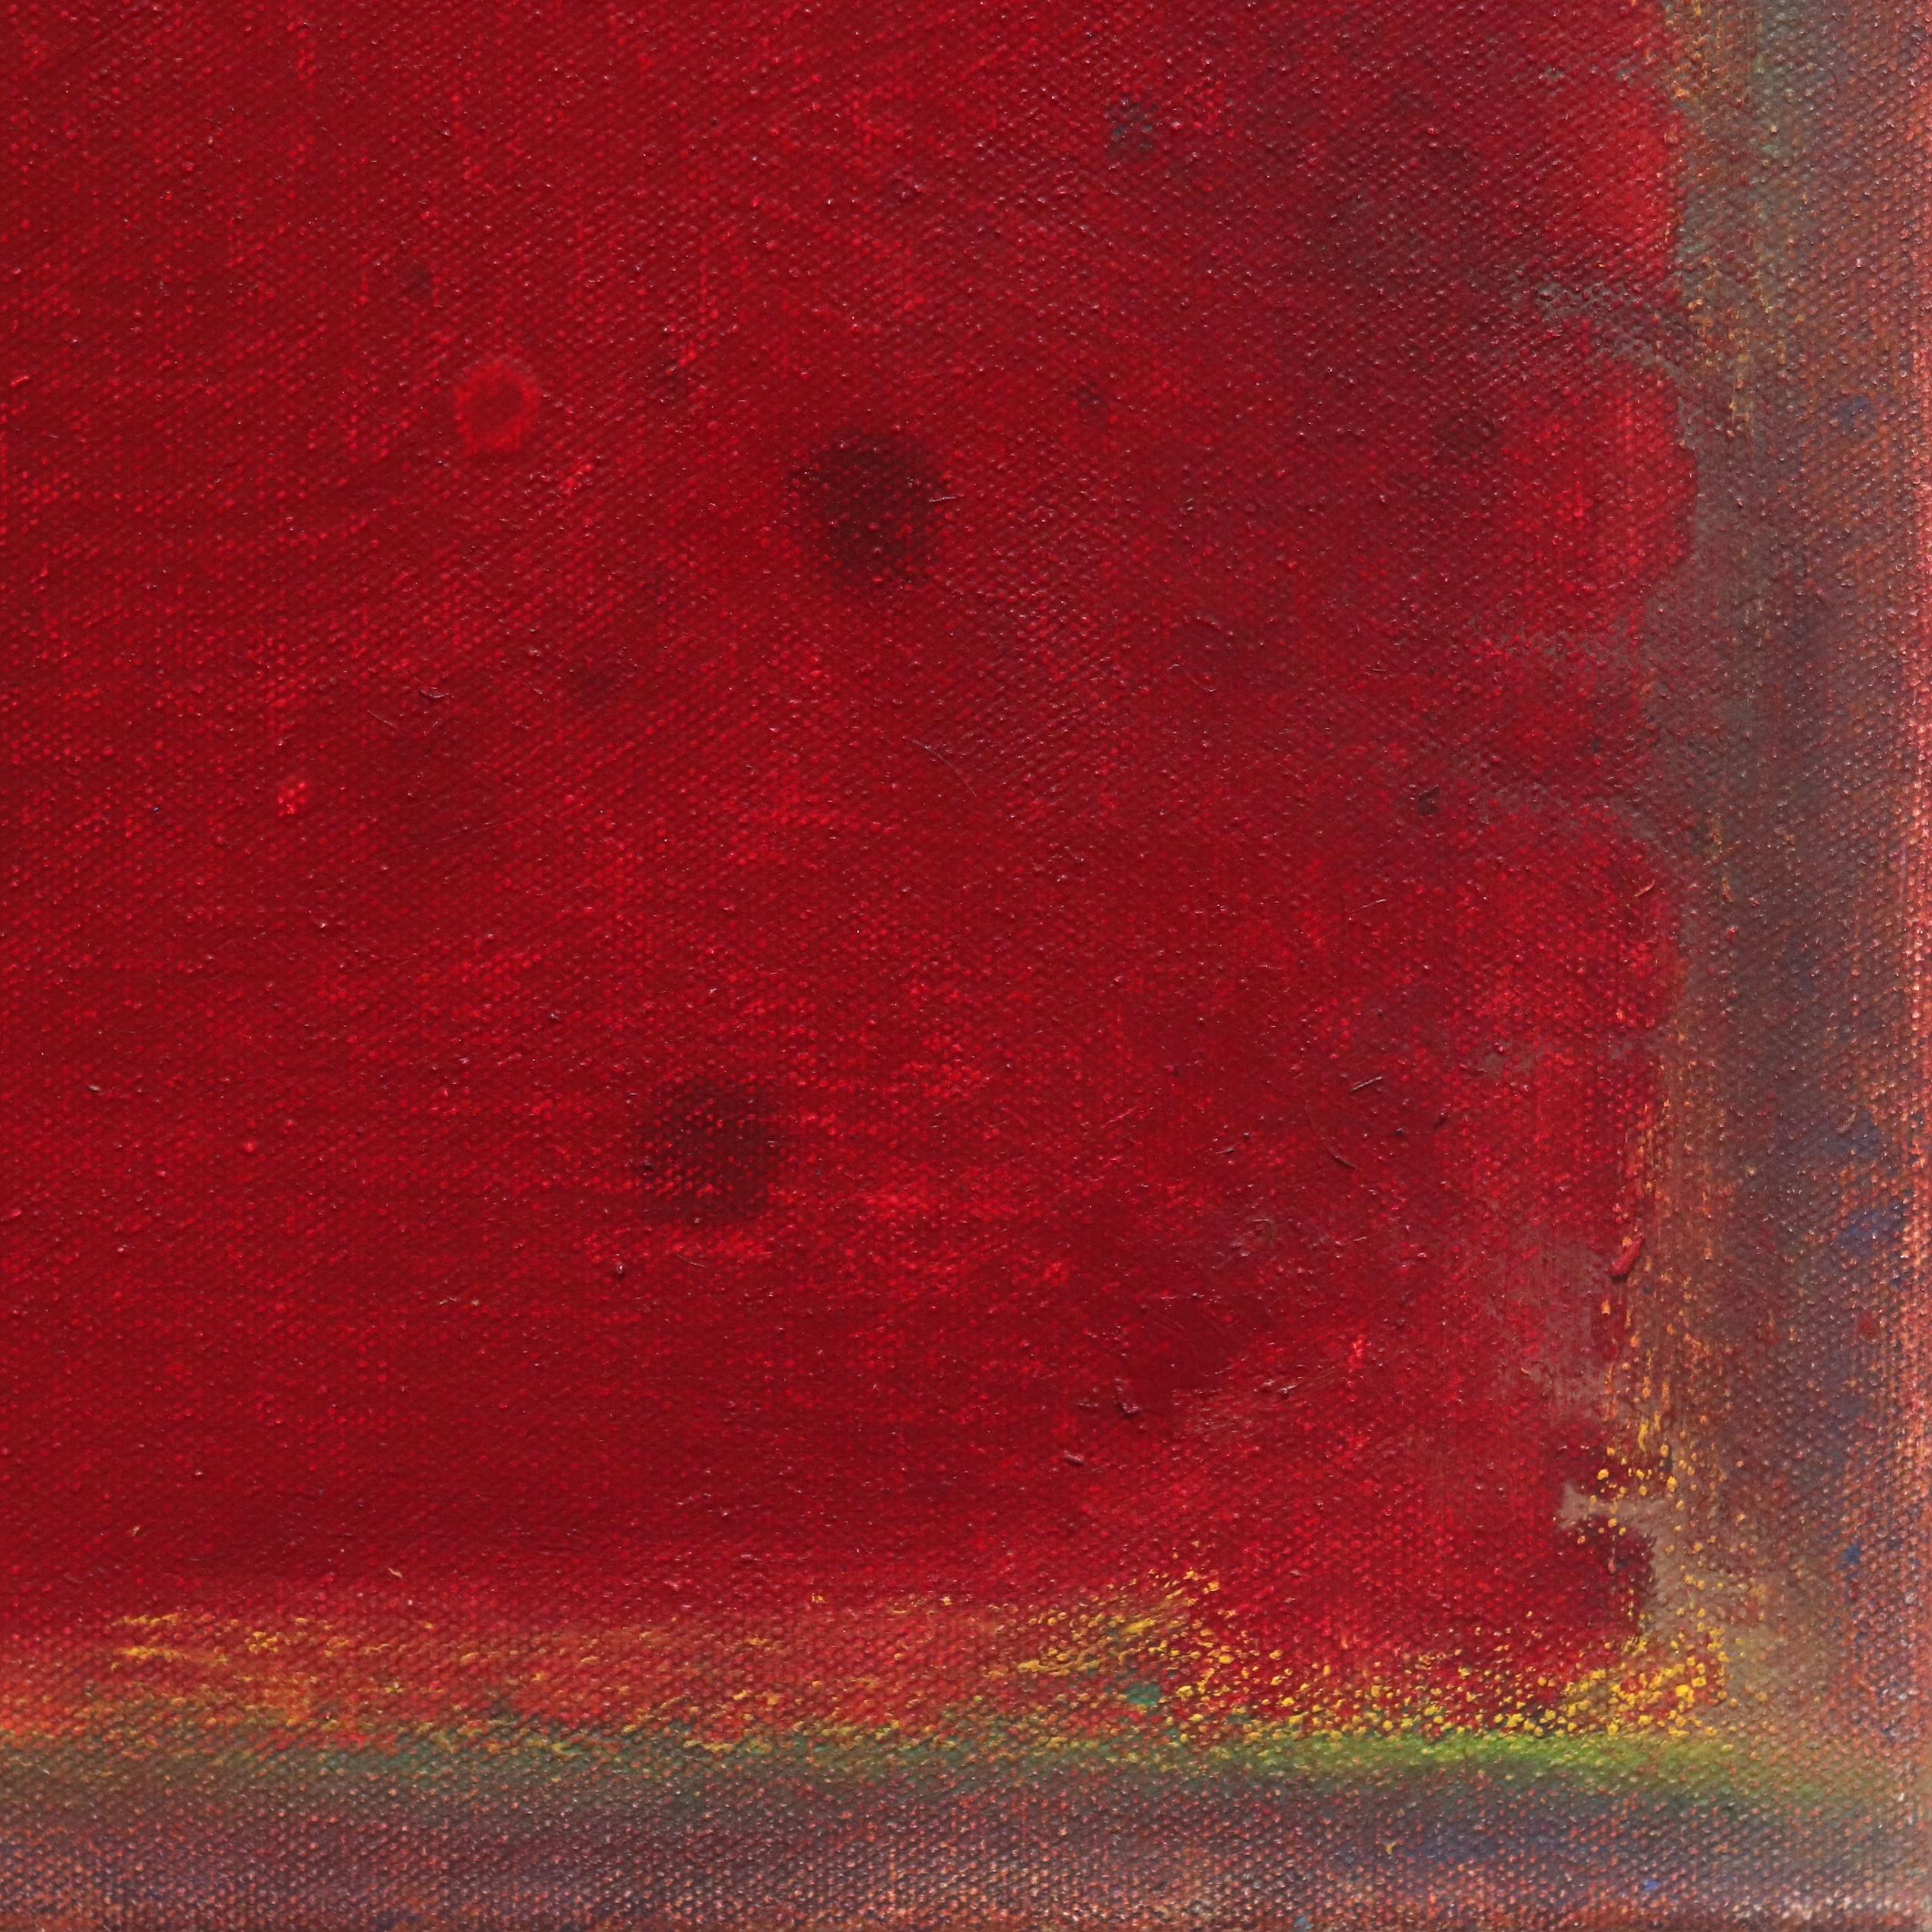 AWH 214 - Original Abstract Expressionist Red Colorfield Oil Painting For Sale 4